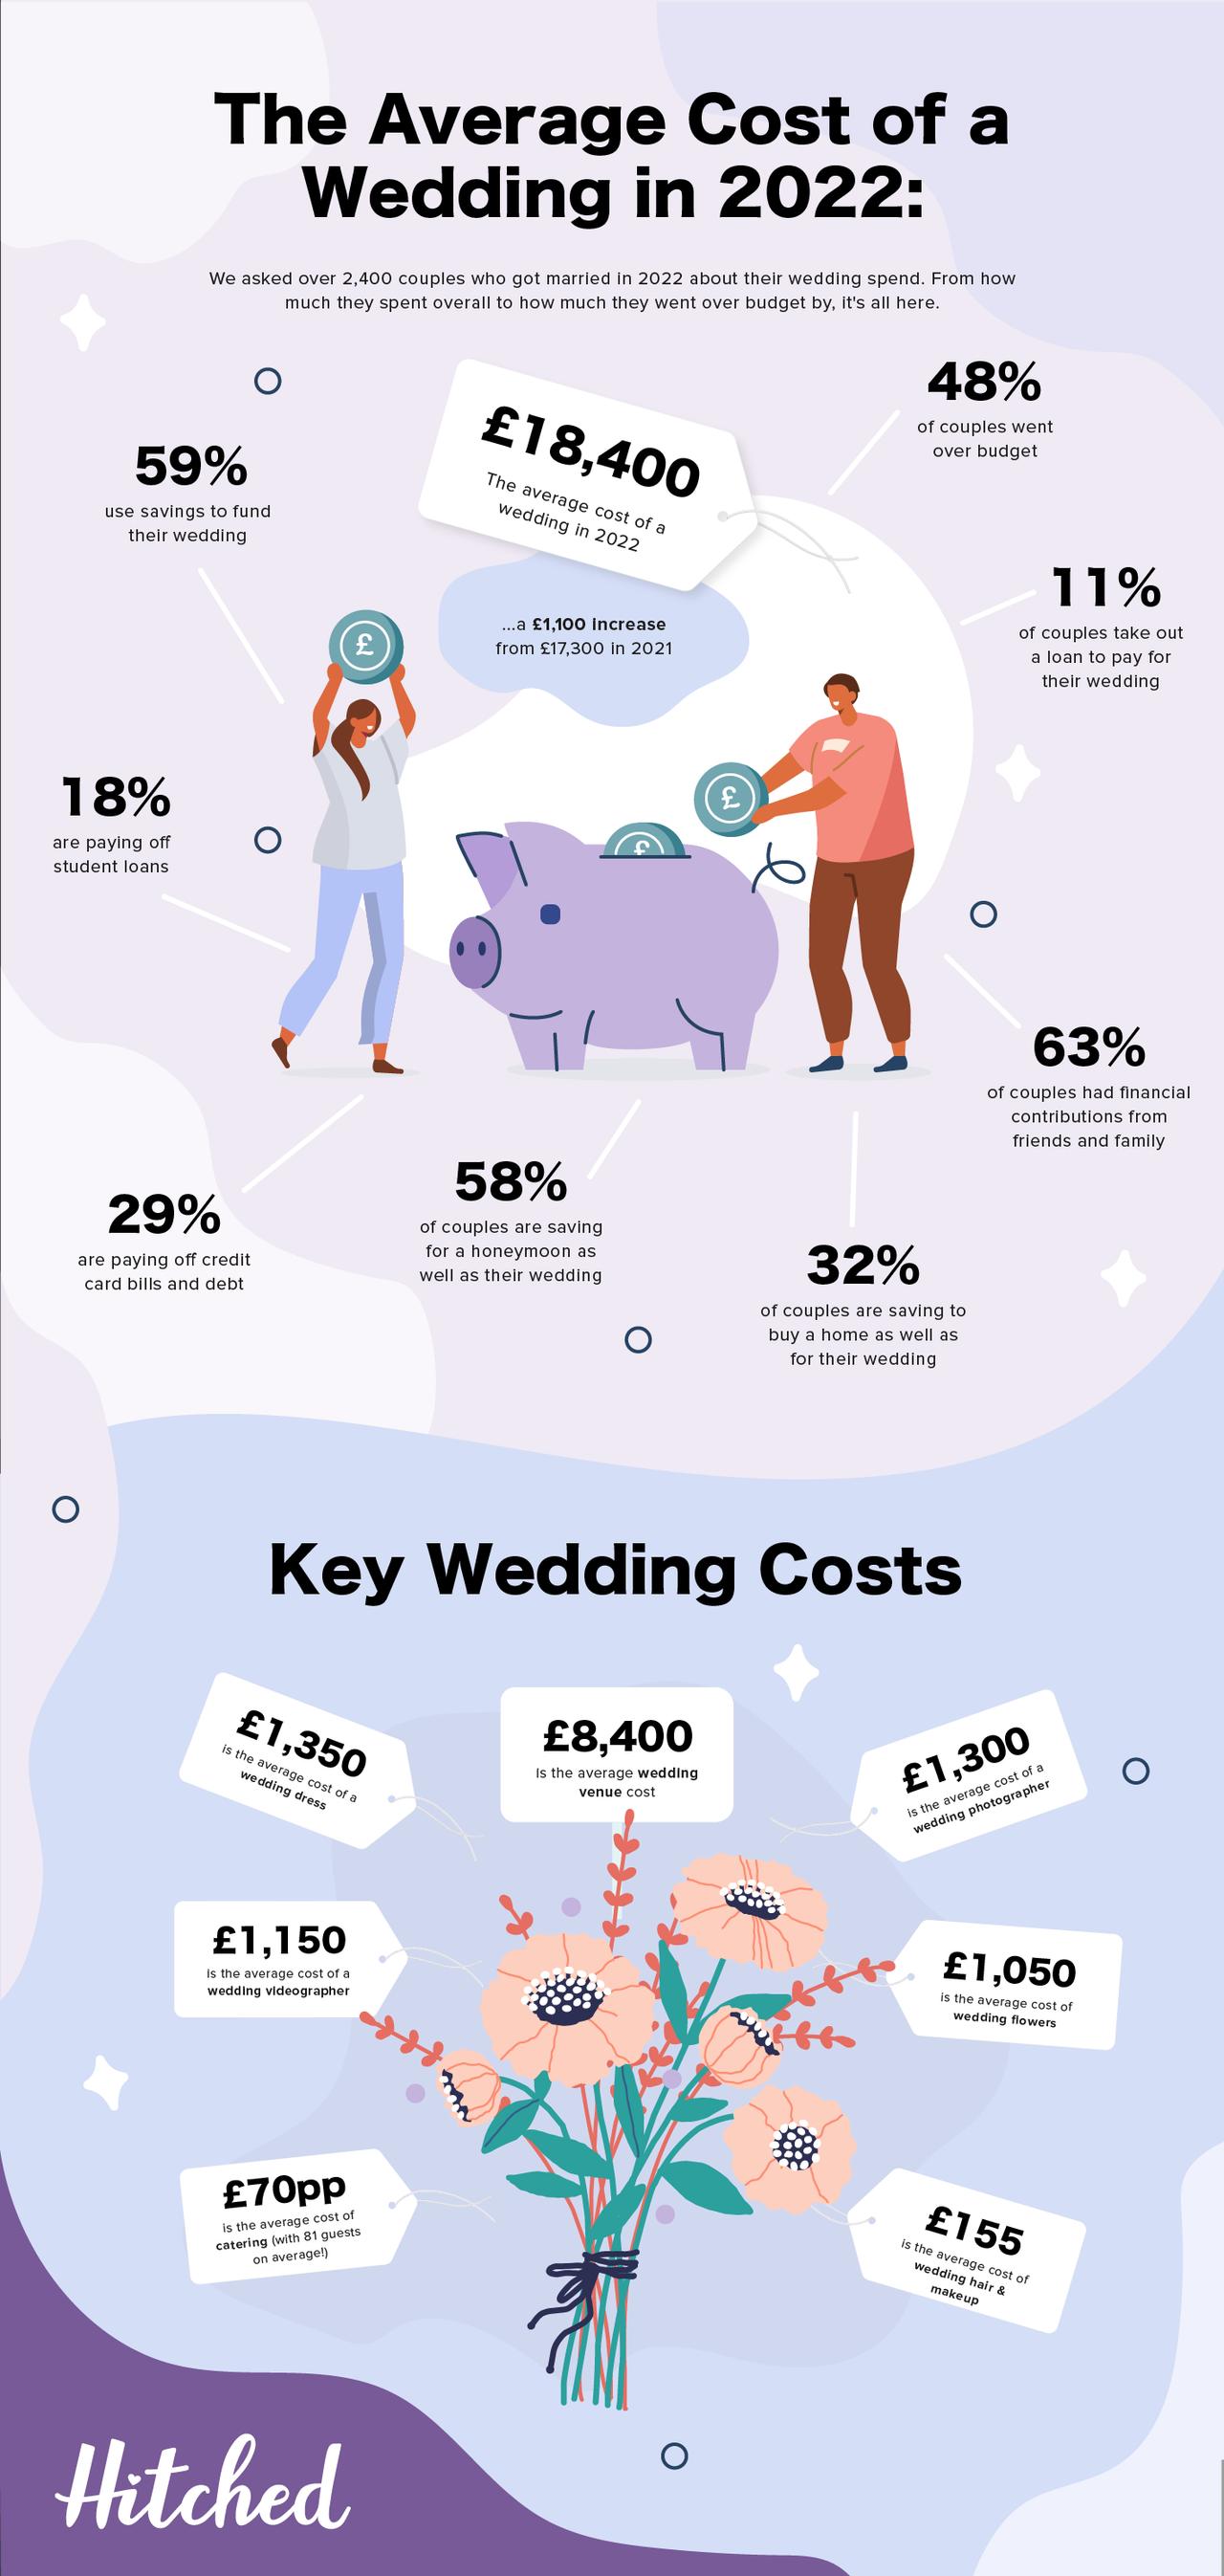 How Much Does The Average Wedding Dress Cost? • Bridilly